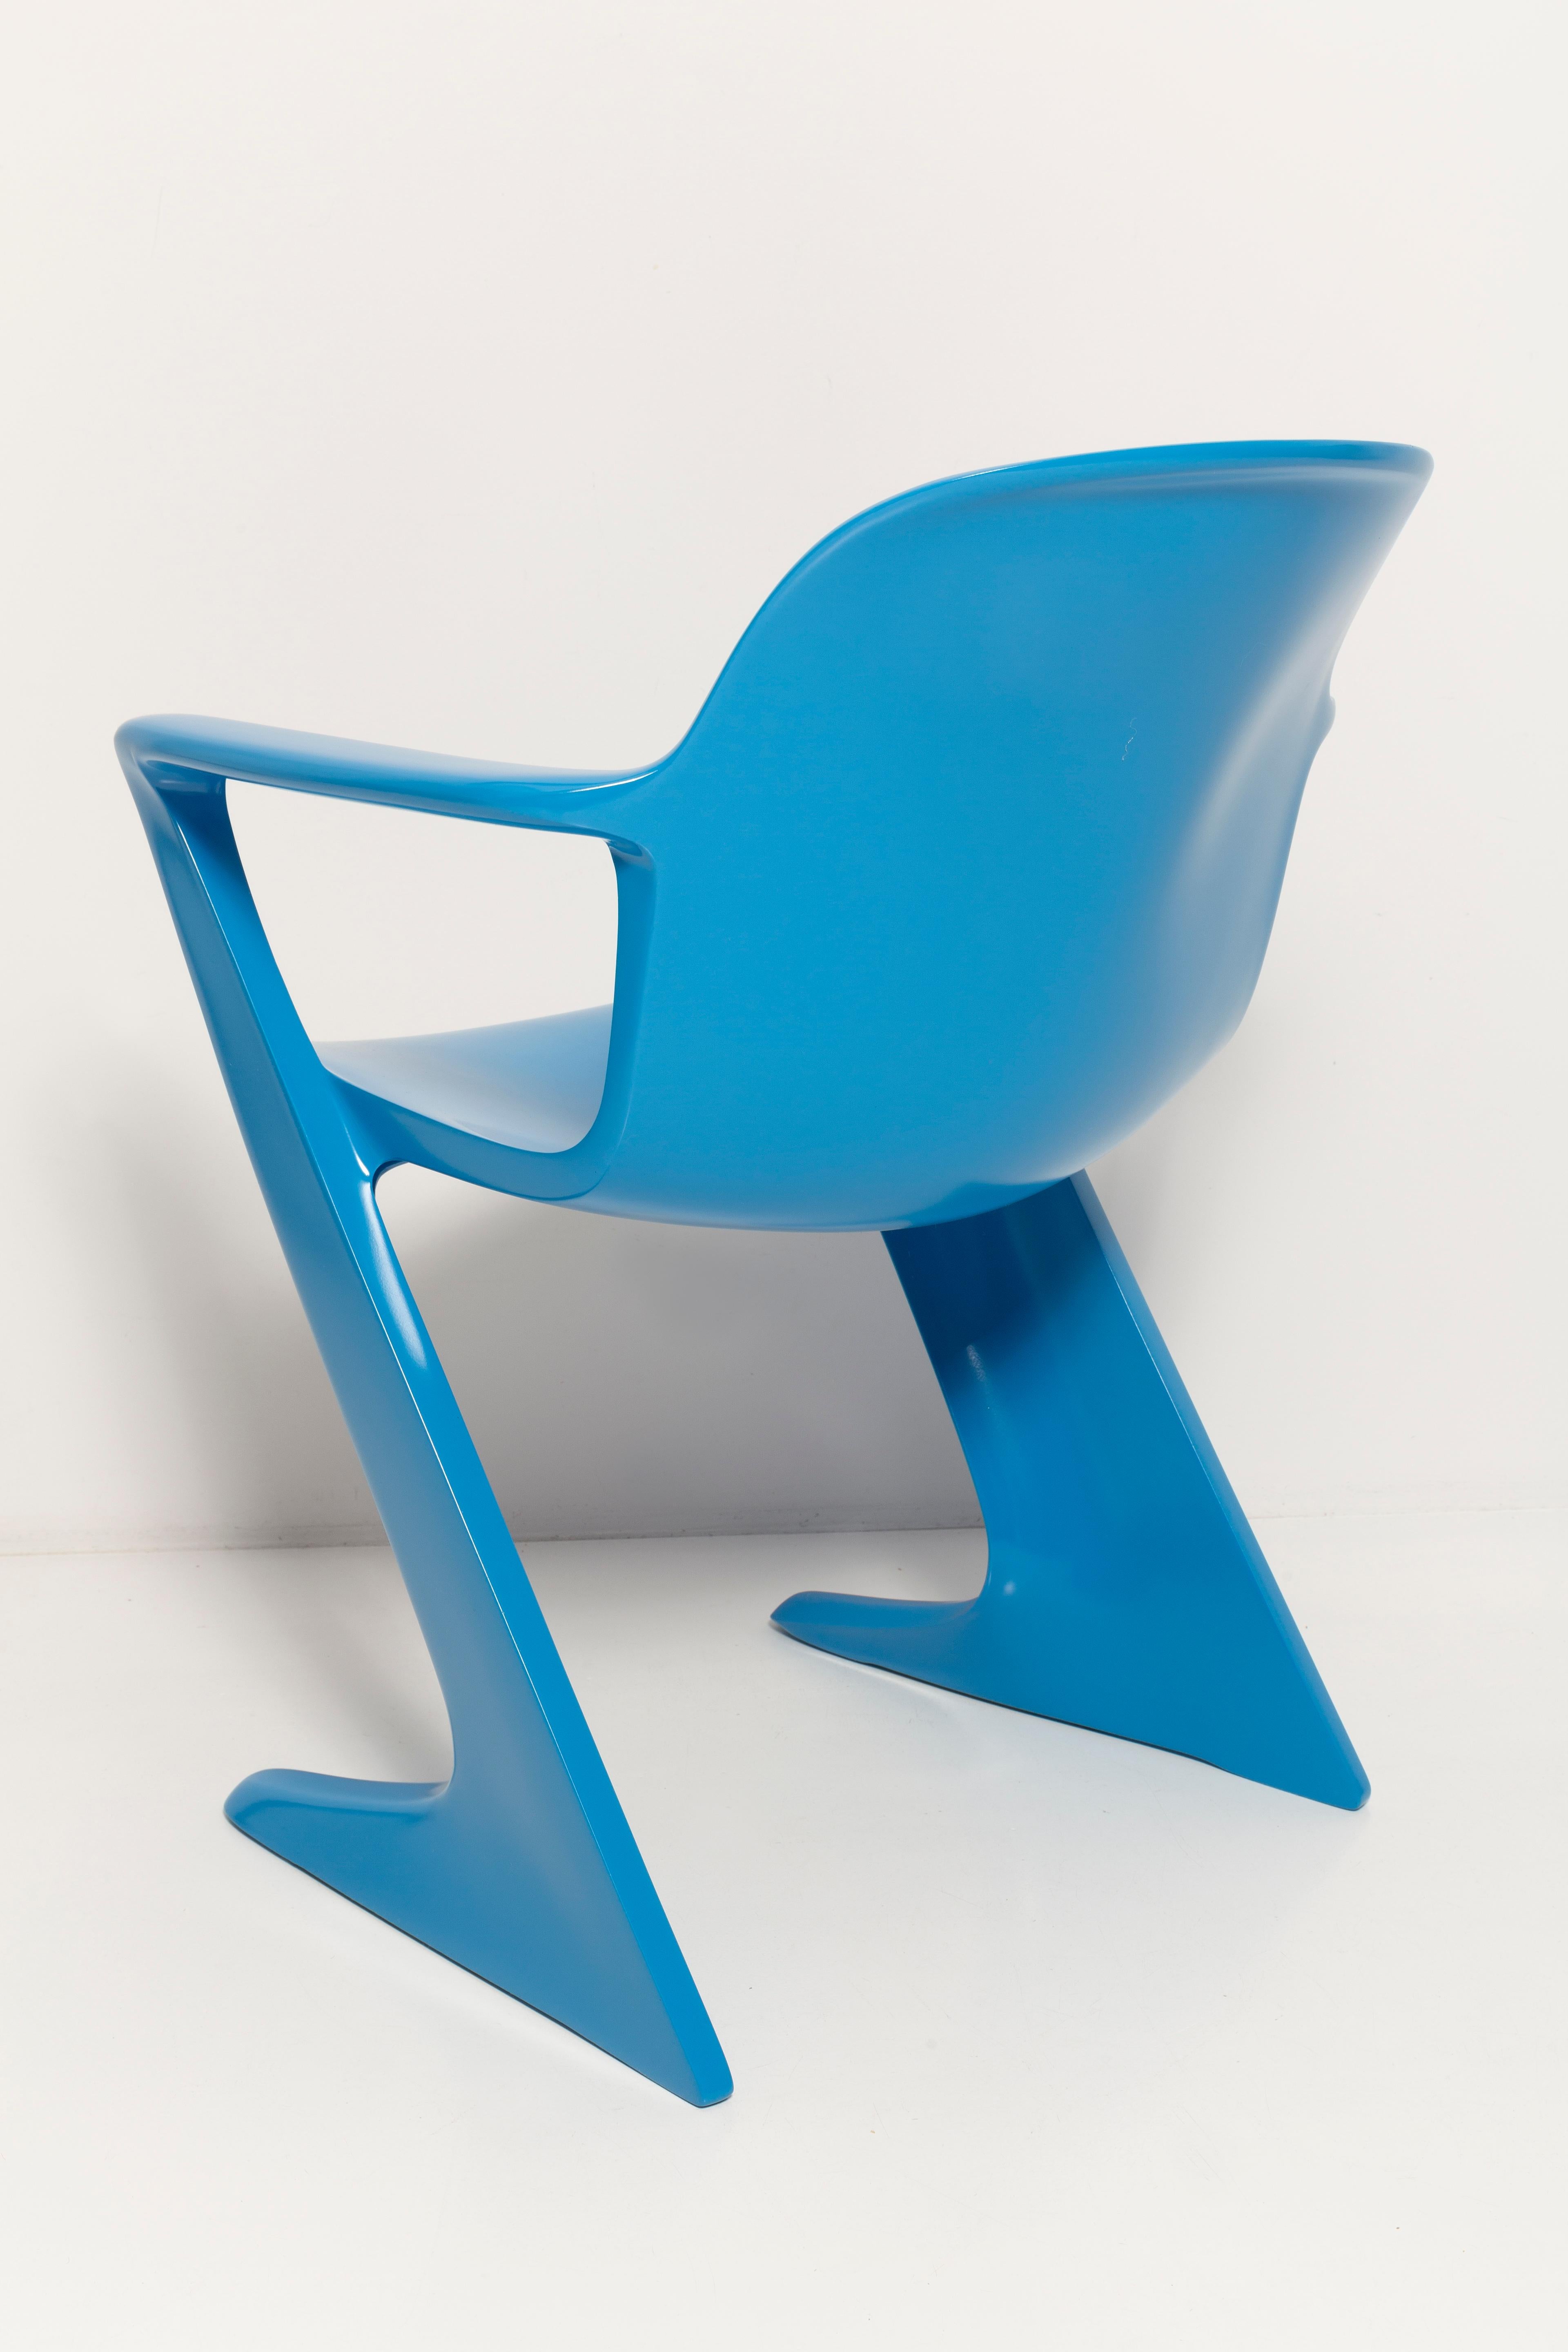 Set of Six Blue Kangaroo Chairs Designed by Ernst Moeckl, Germany, 1960s For Sale 3